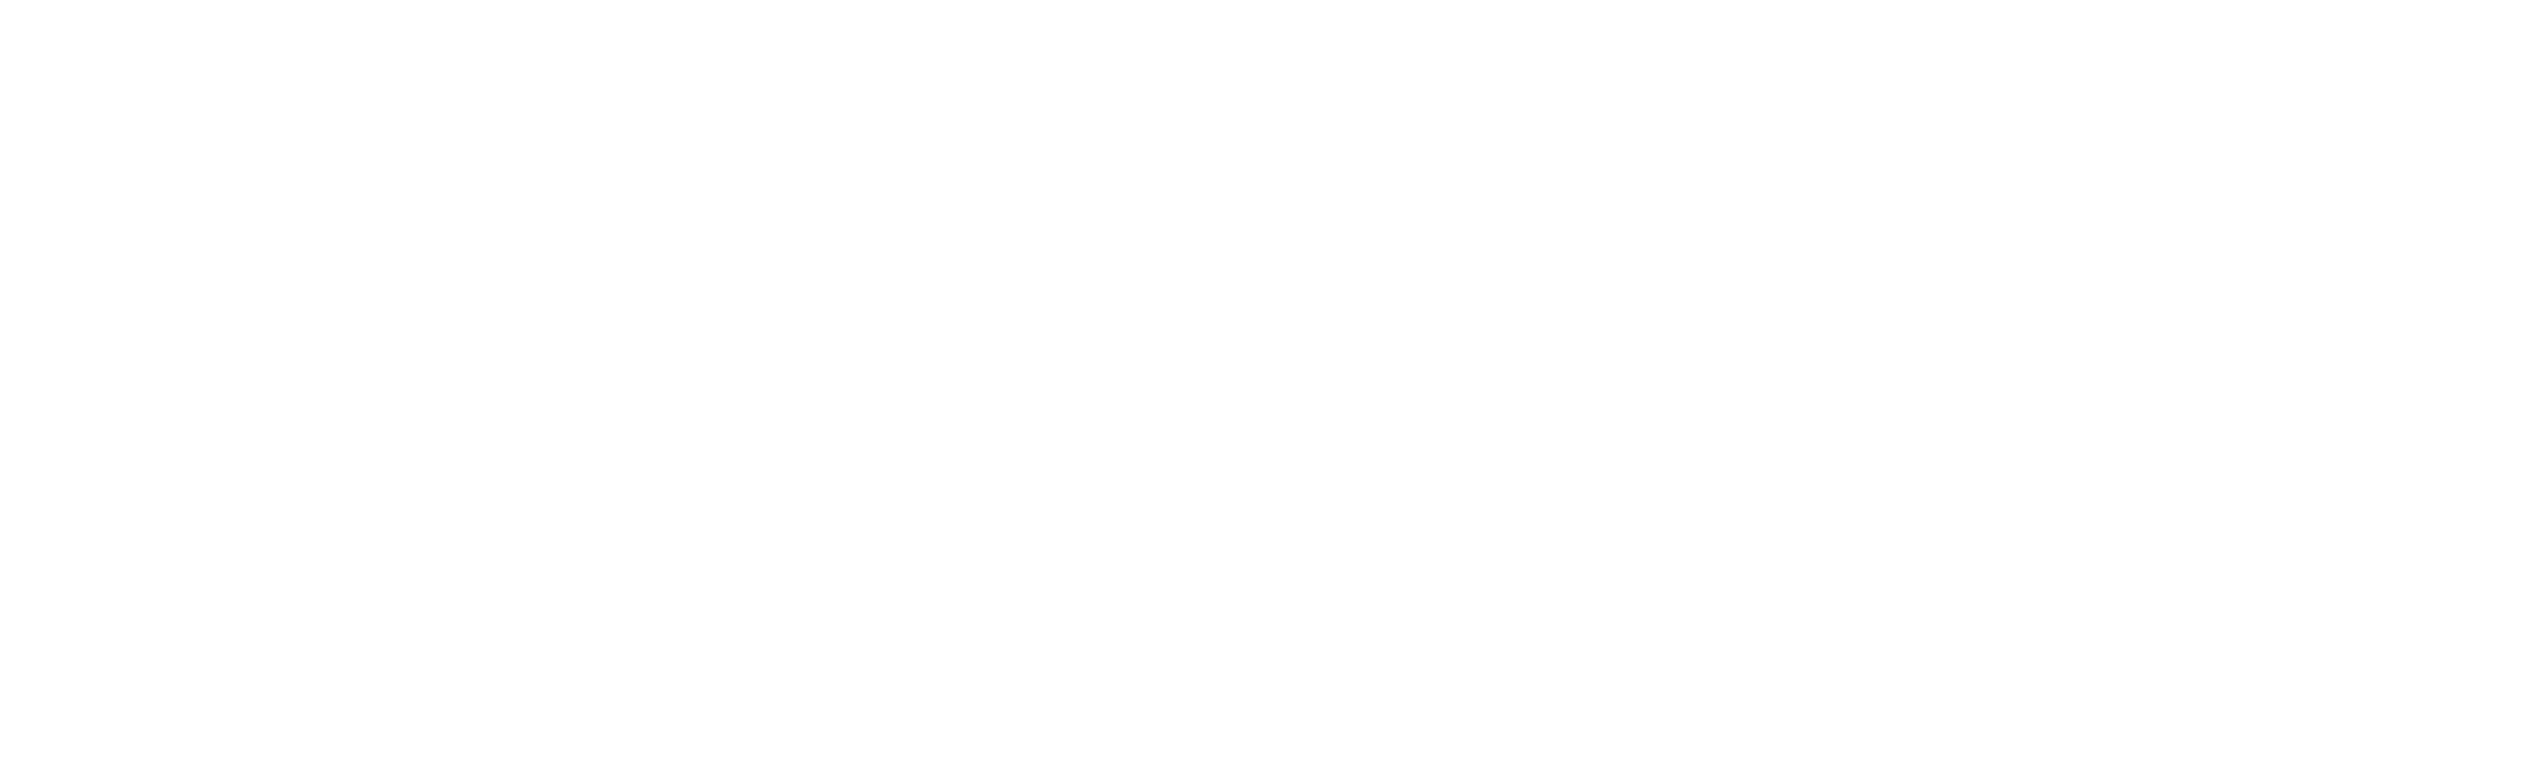 The Foundation of Community Hospice and Palliative Care logo